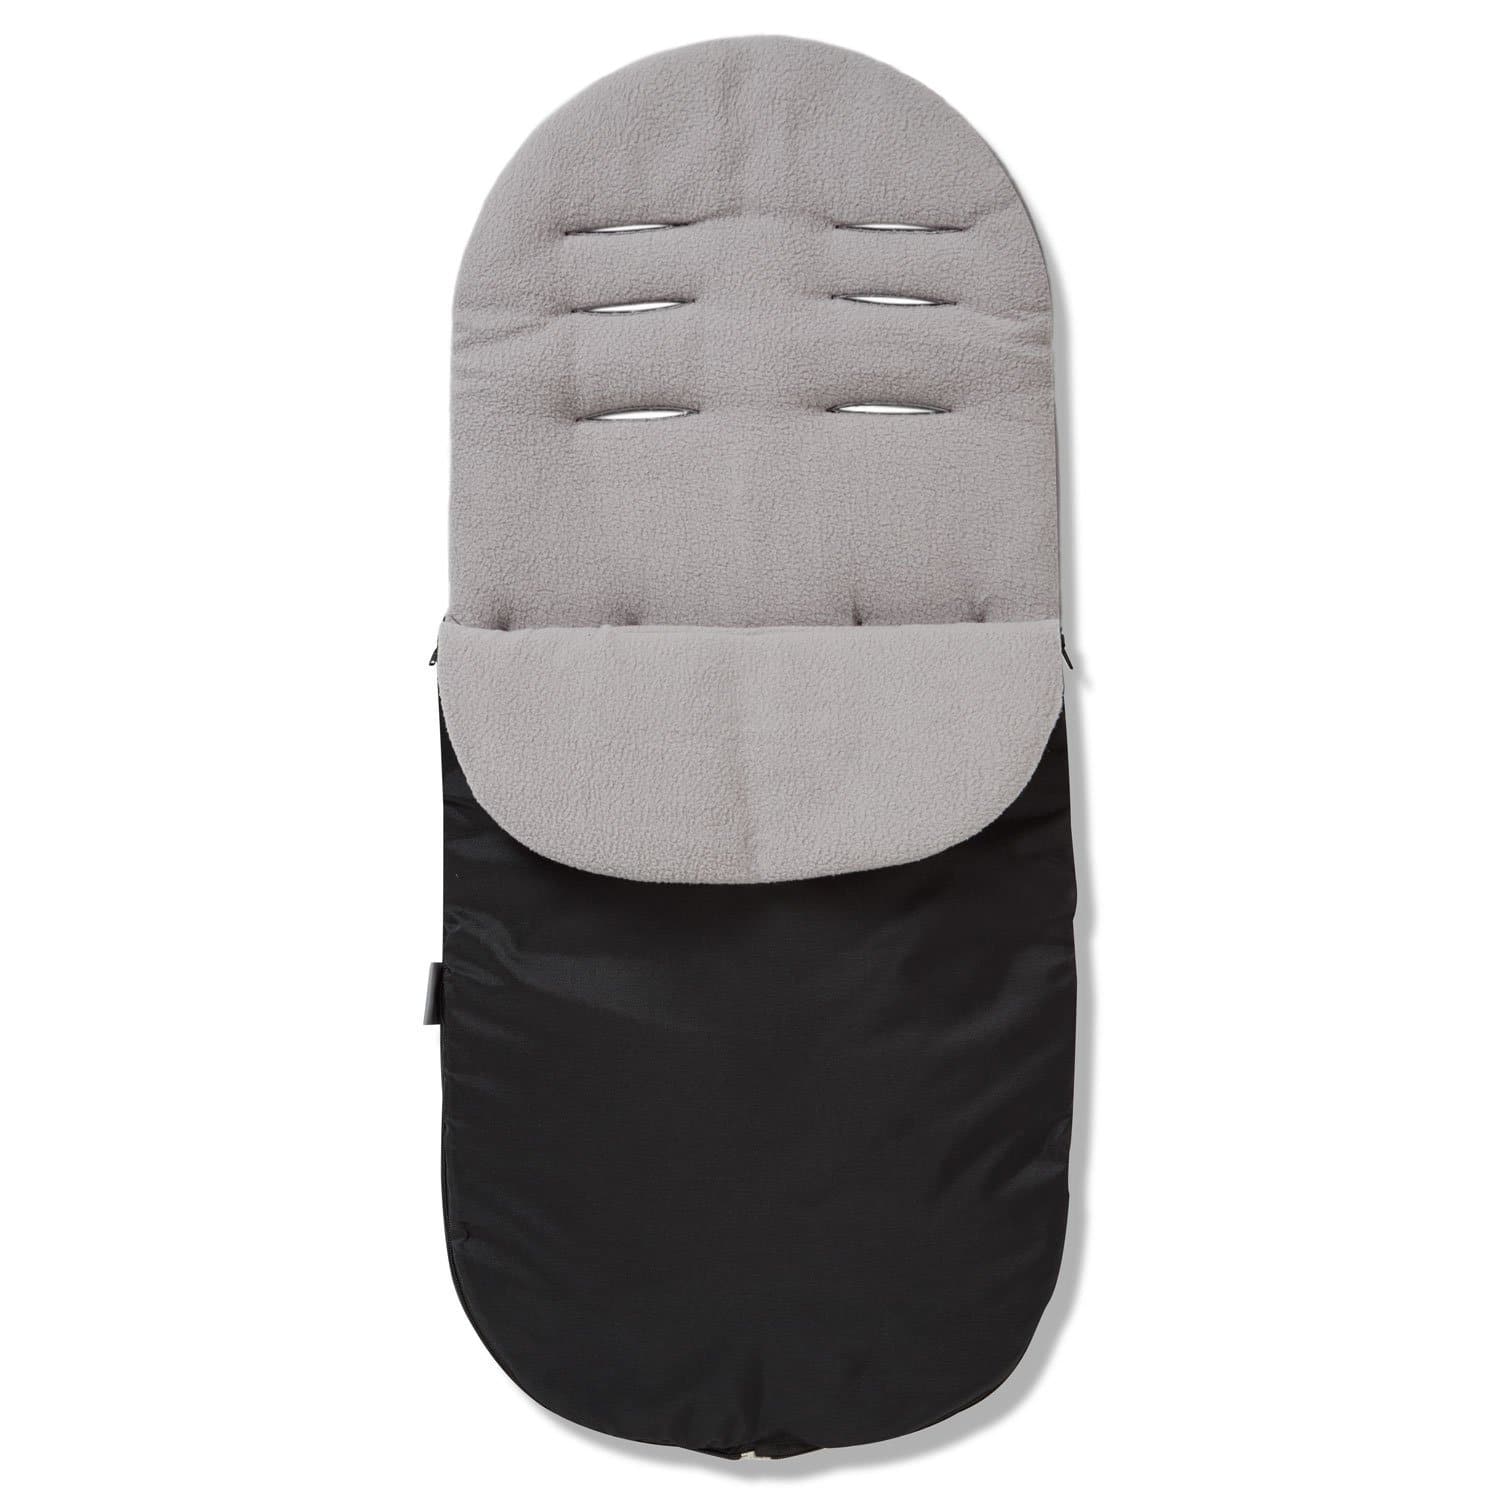 Footmuff / Cosy Toes Compatible with Ickle Bubba - Grey / Fits All Models | For Your Little One